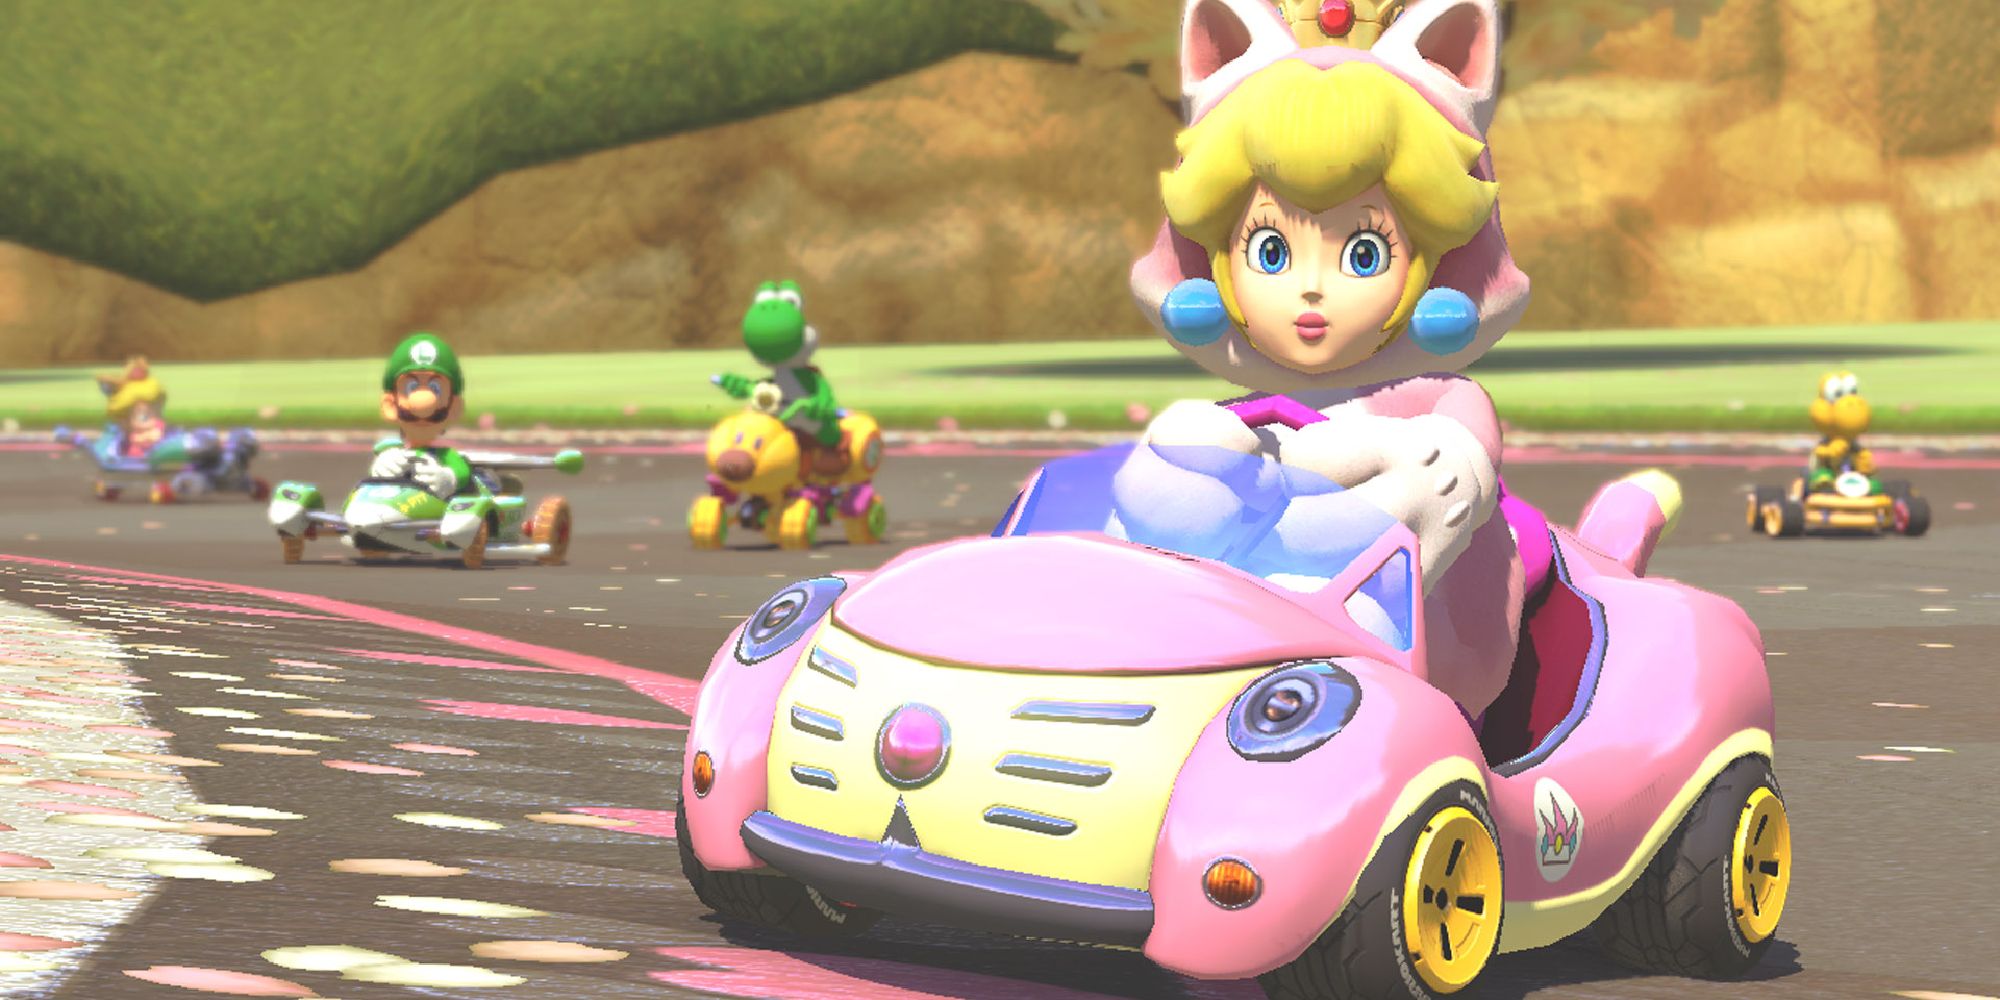 Best Vehicles Cat Peach driving the Cat Cruiser kart with Yoshi, Luigi and Koopa Troopa in the background